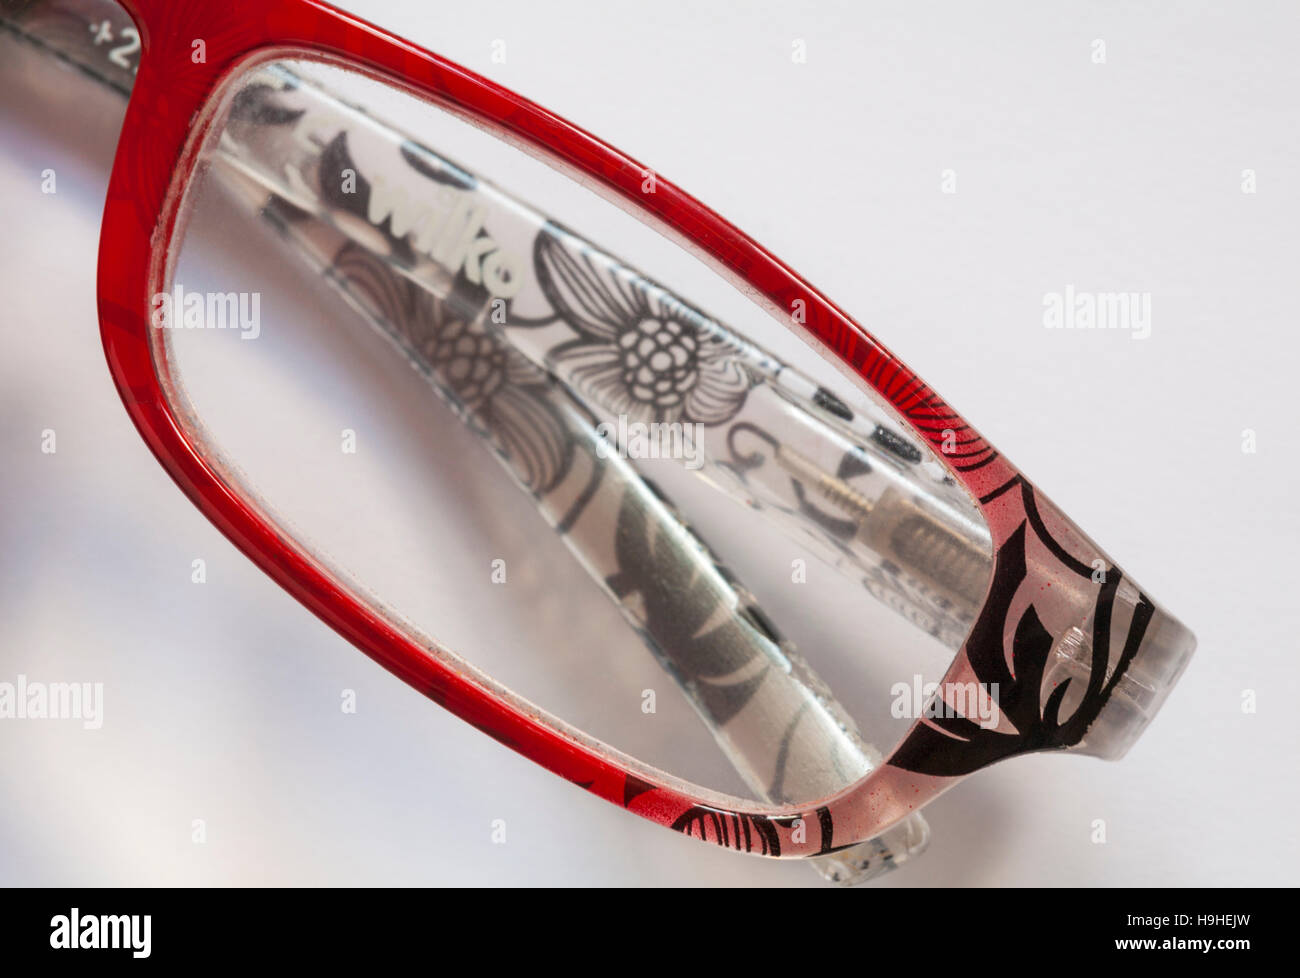 close up detail of Wilko glasses on white background Stock Photo